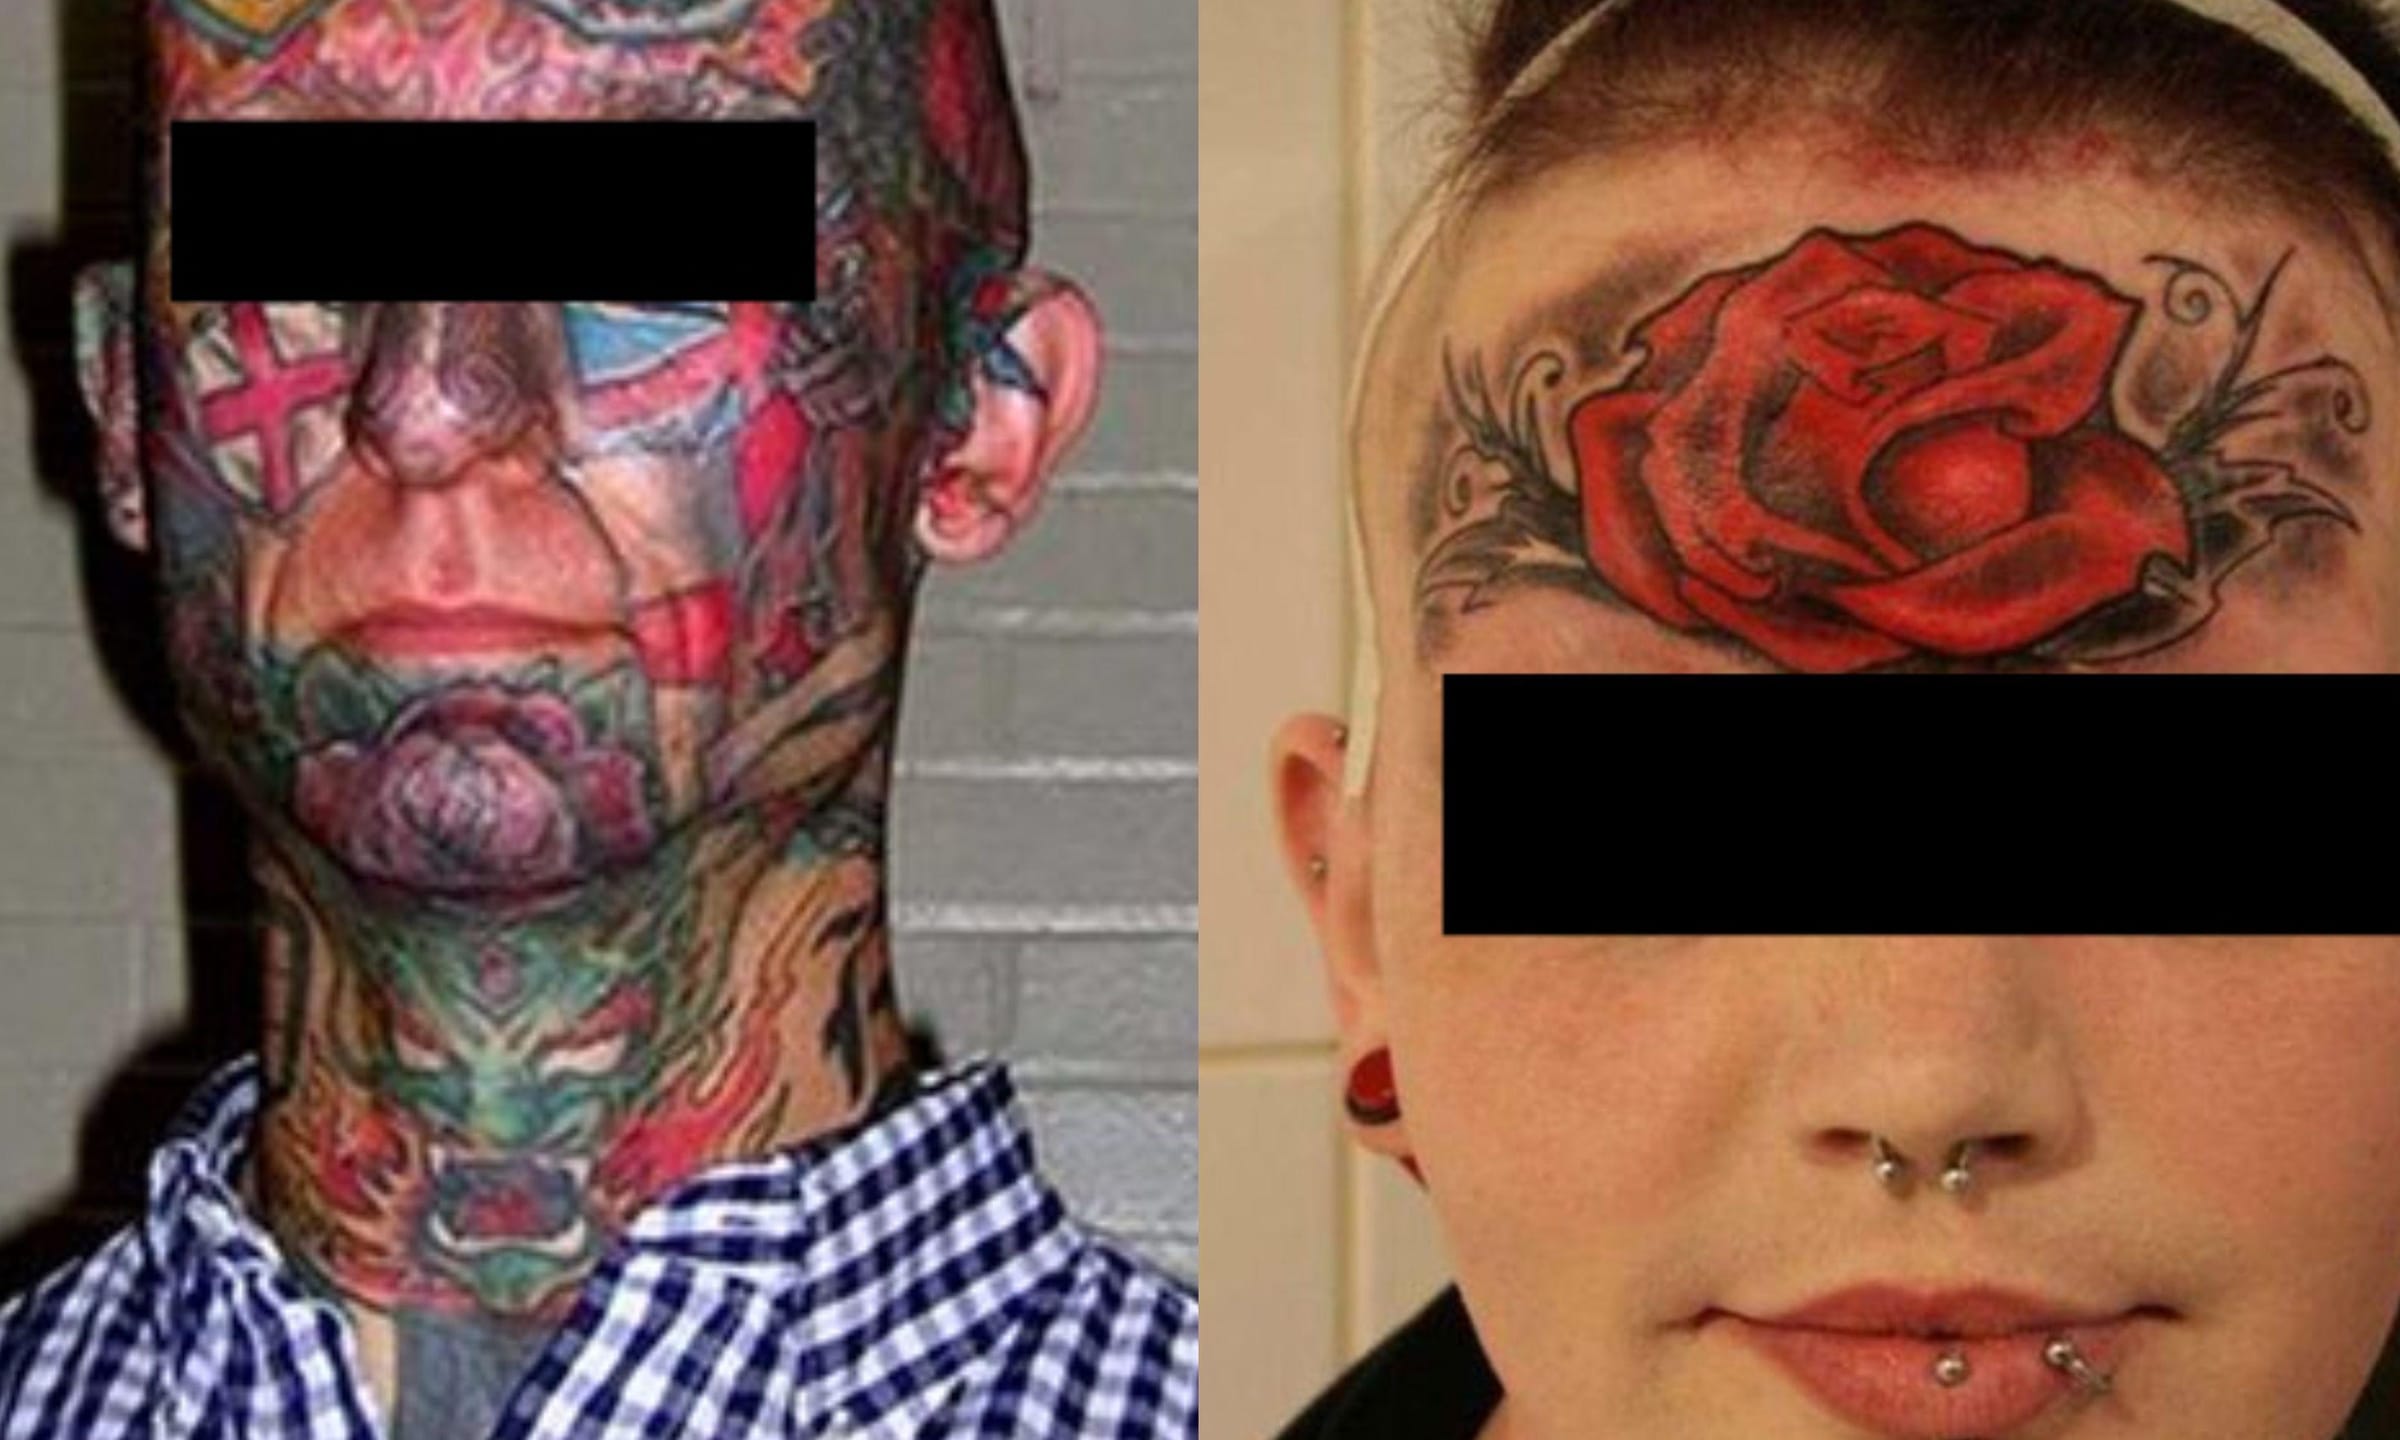 16 Ugly Face Tattoos That Anyone With a Brain Would Regret